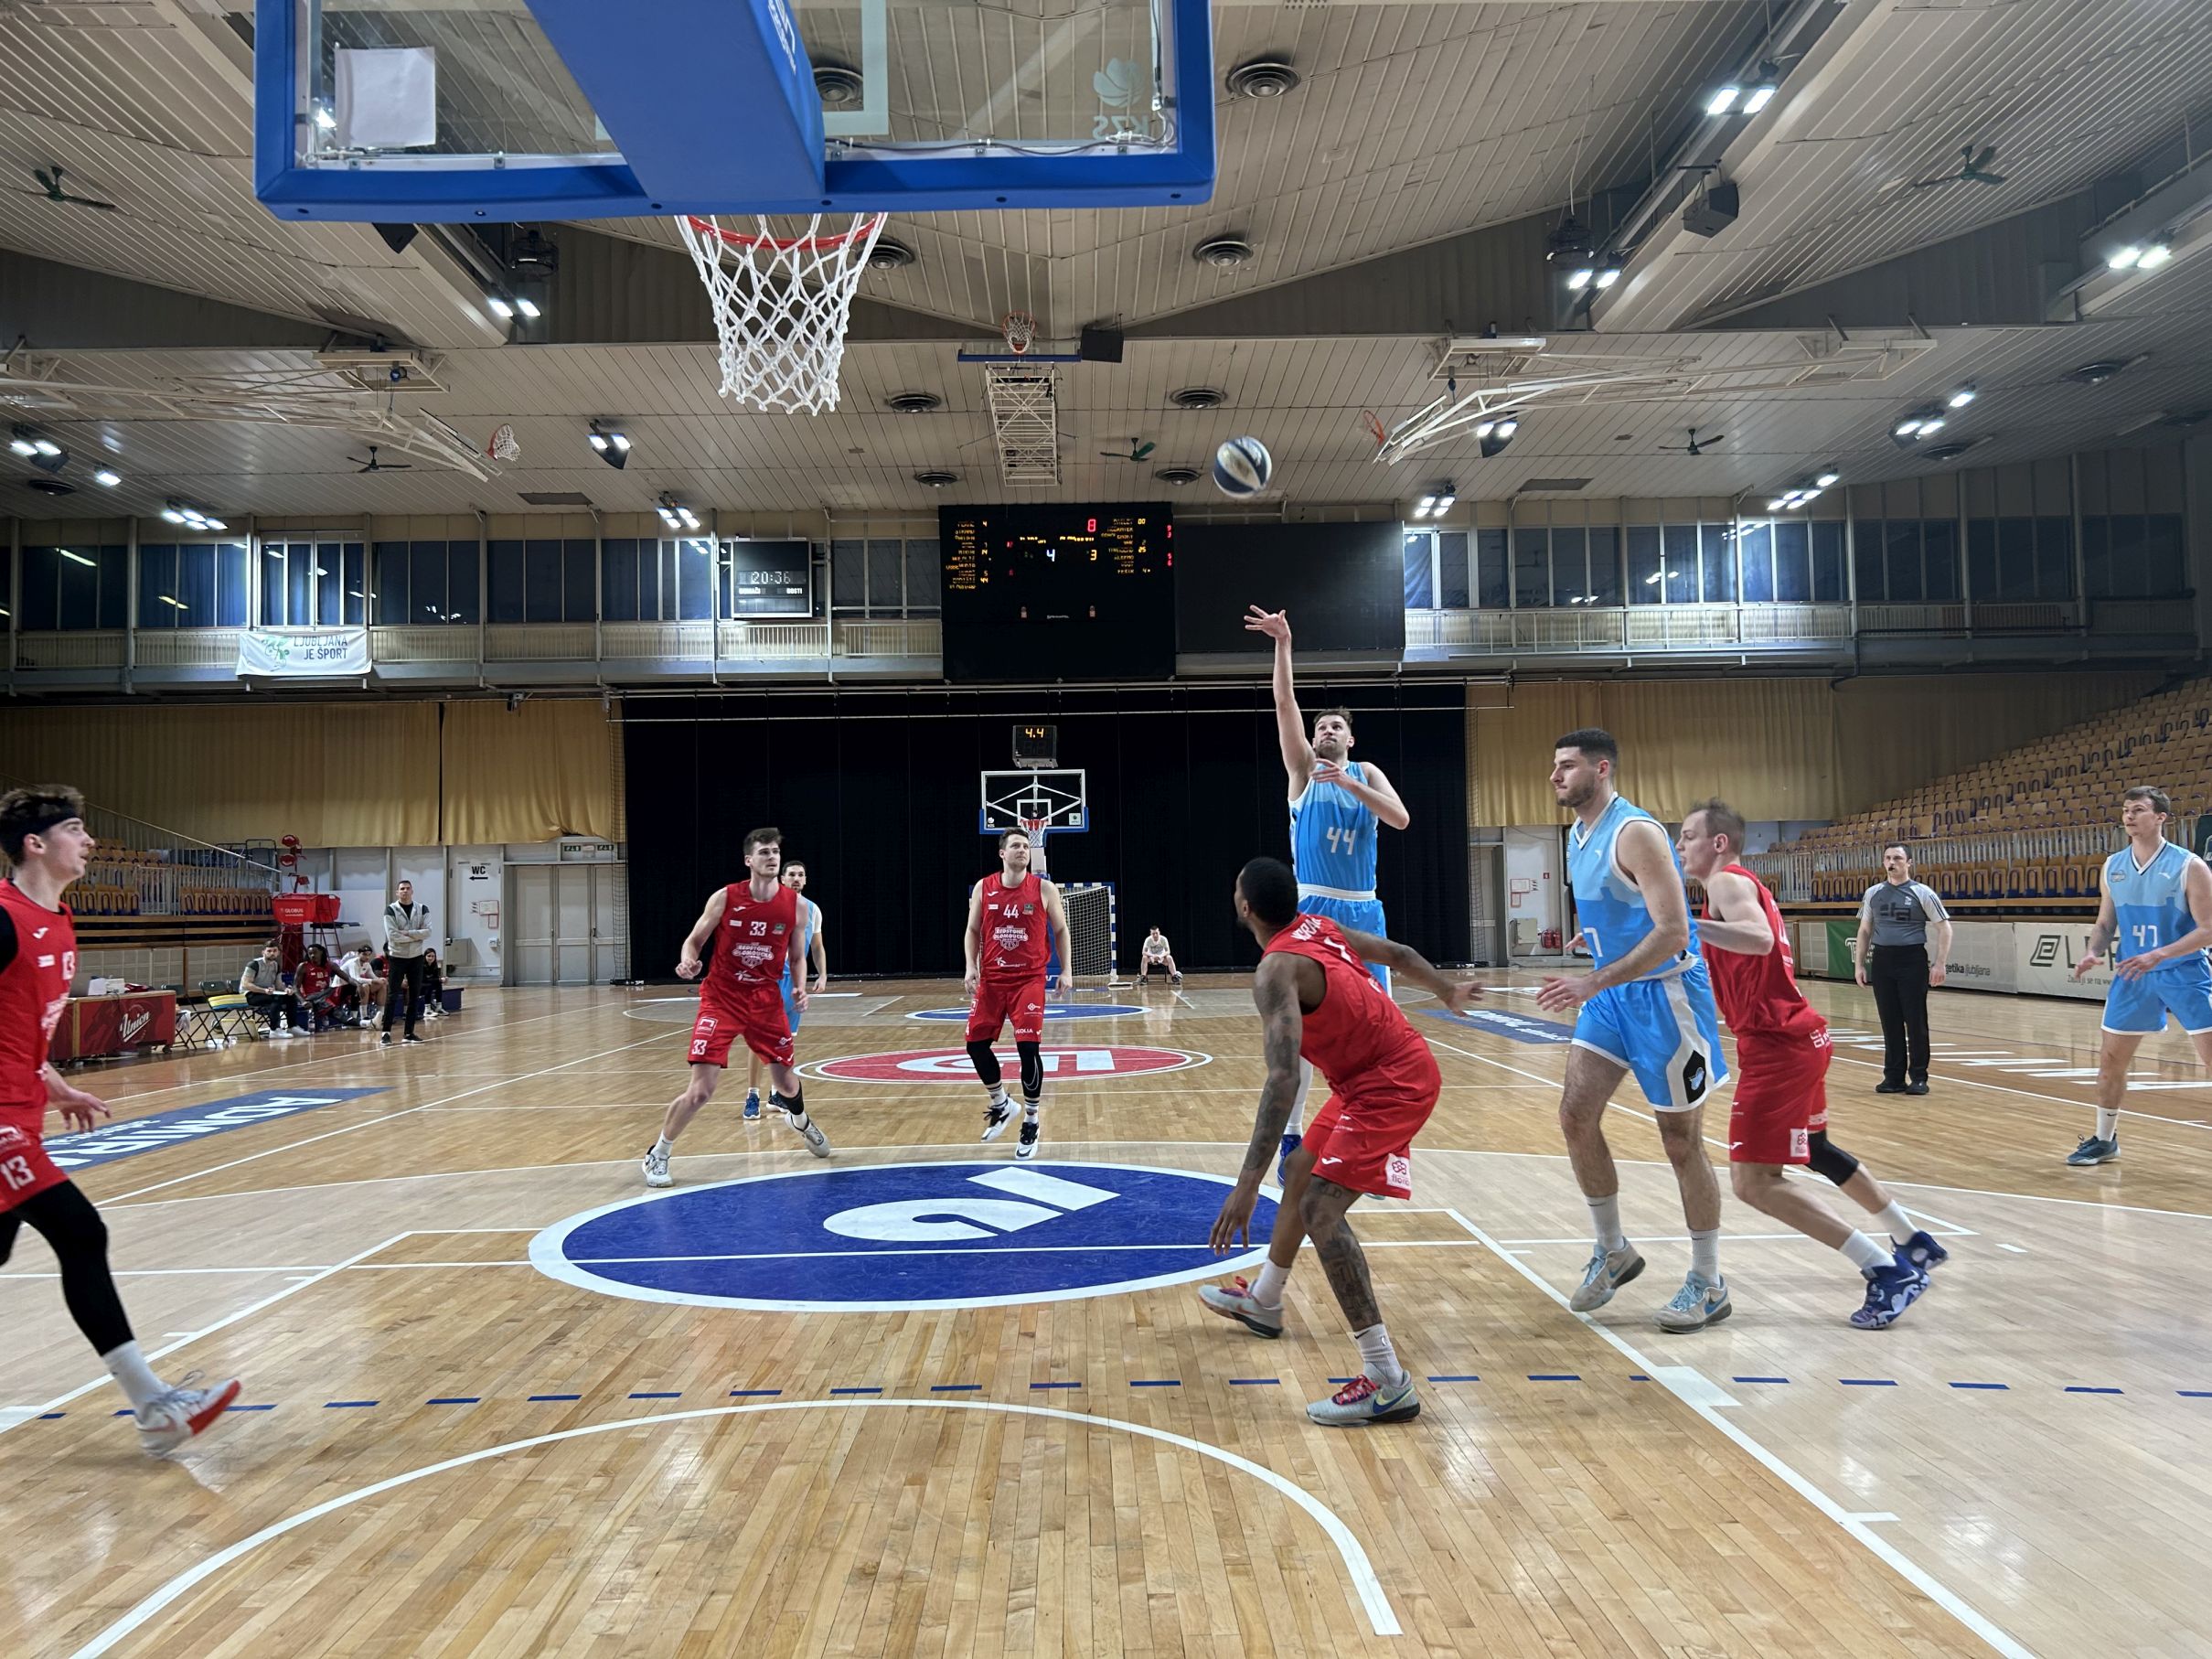 Ilirija finished their AAC campaign with a win